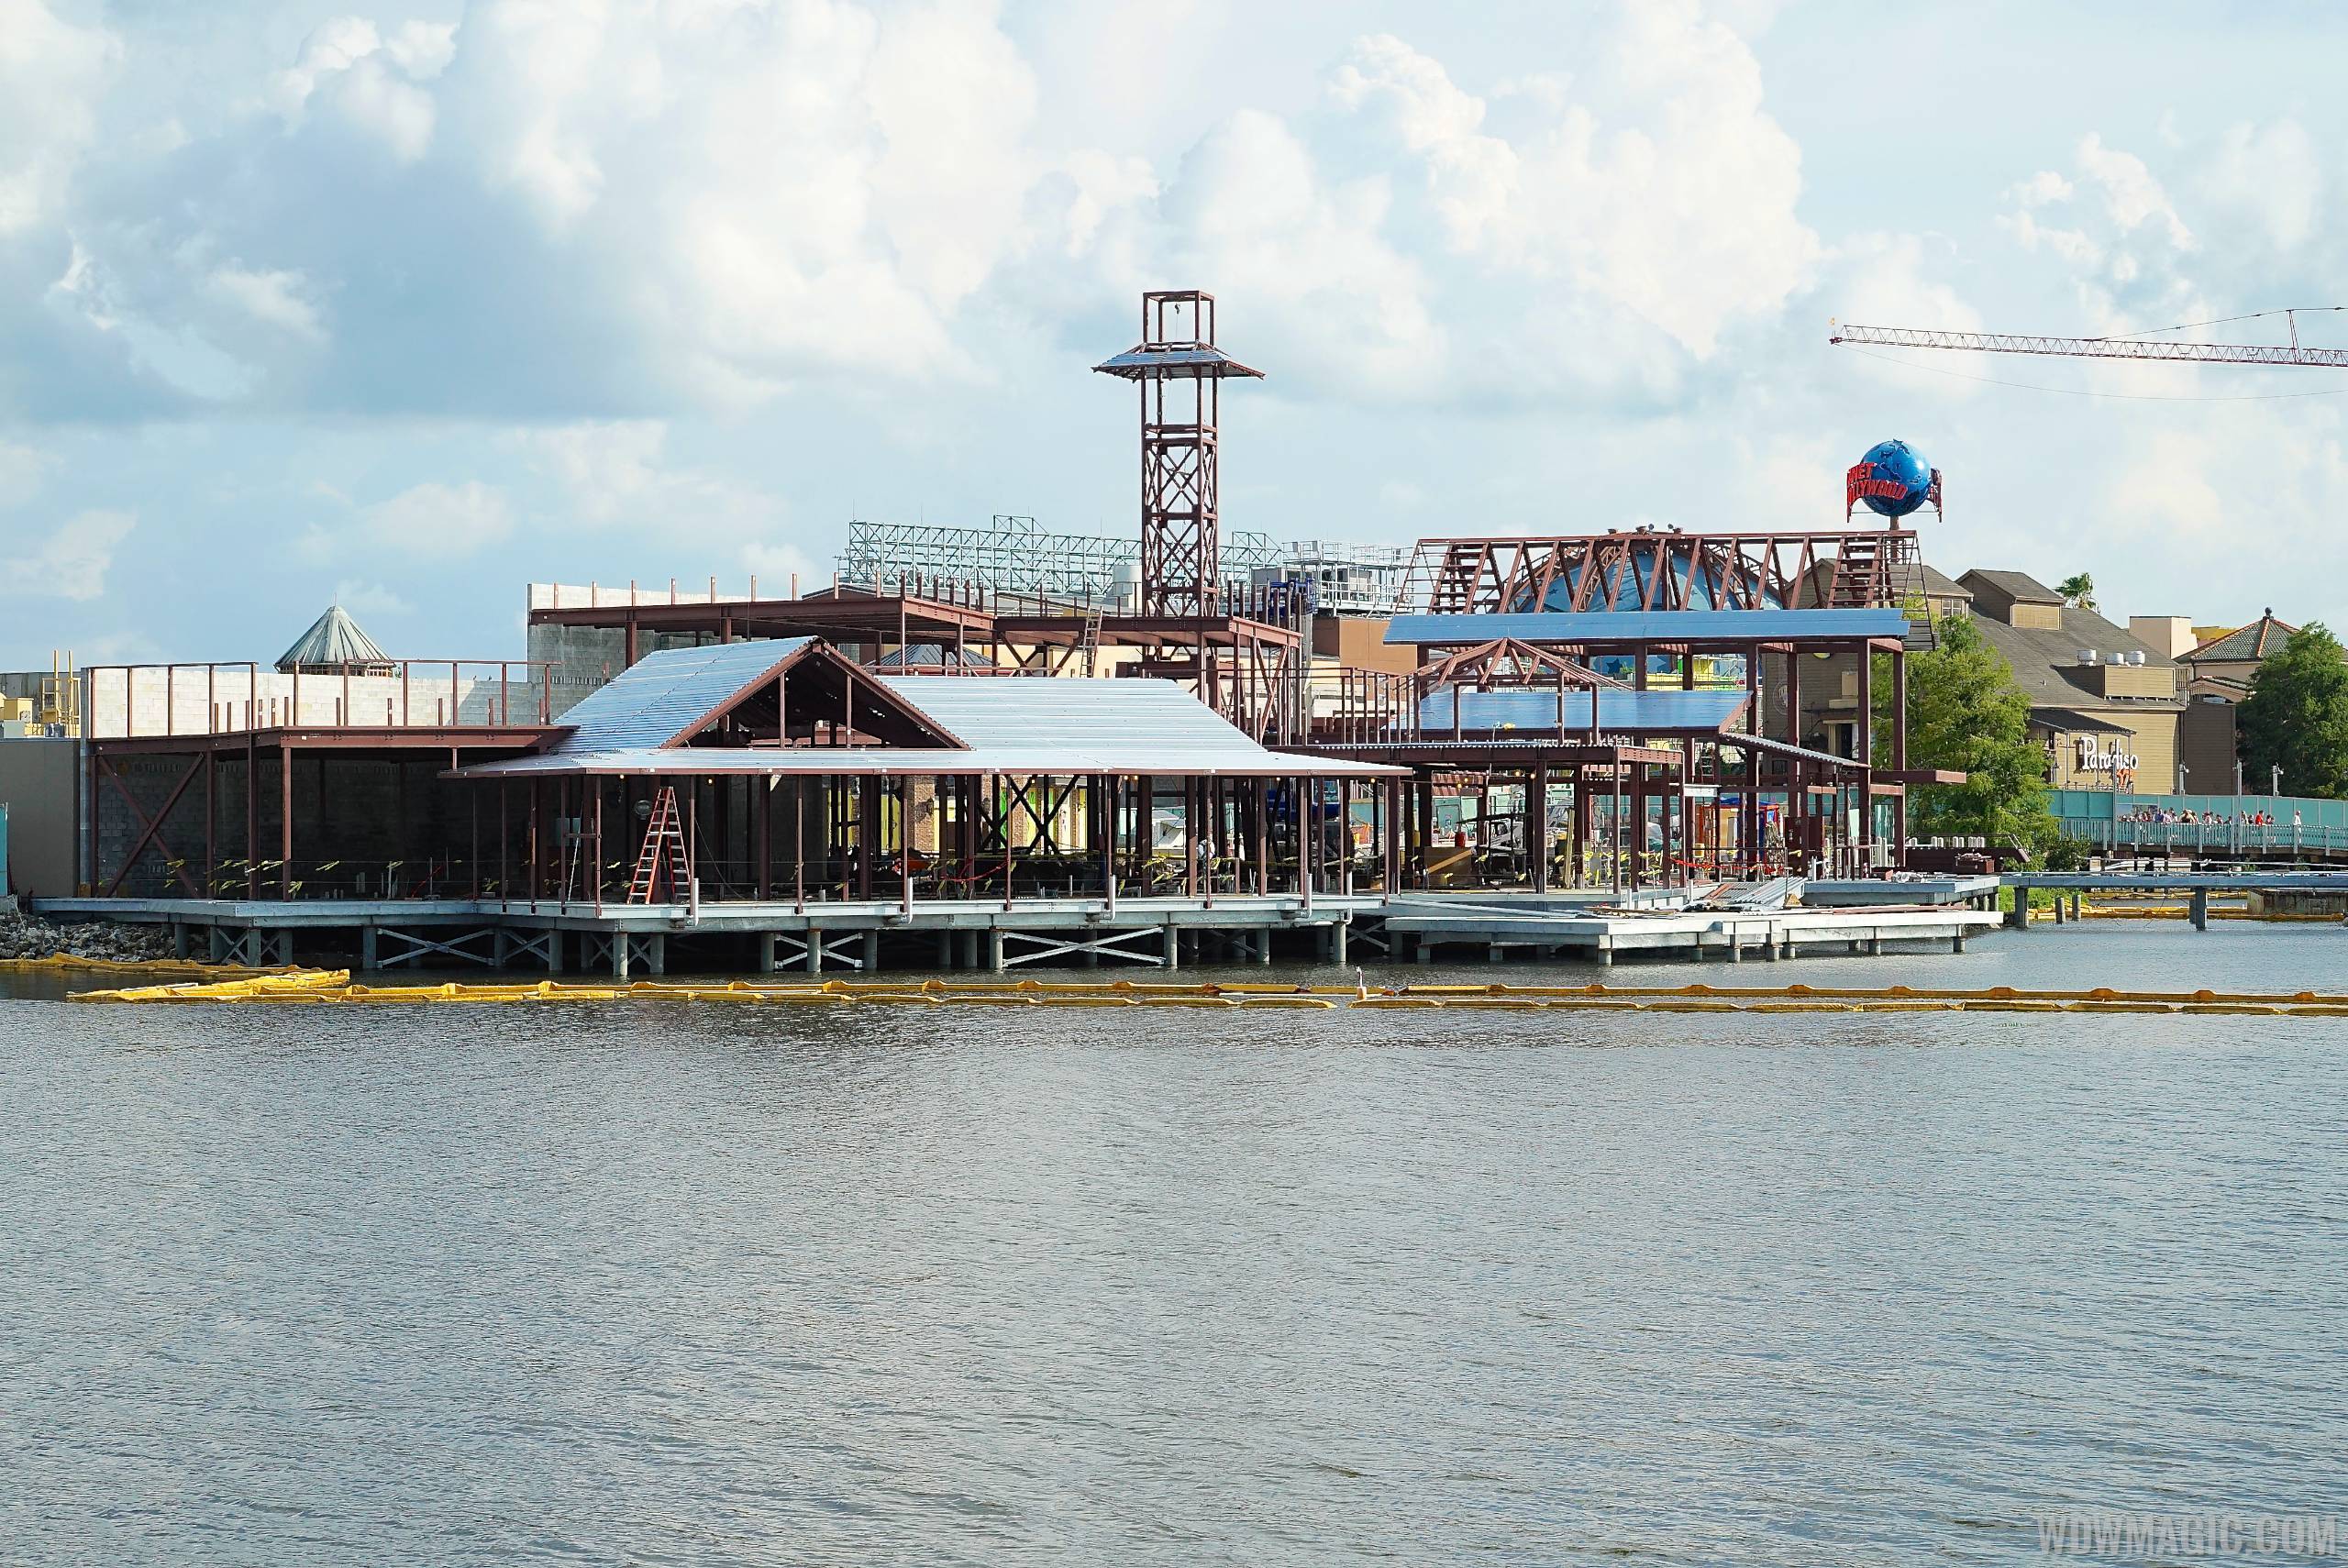 PHOTOS - A look at The Boathouse from across the lake